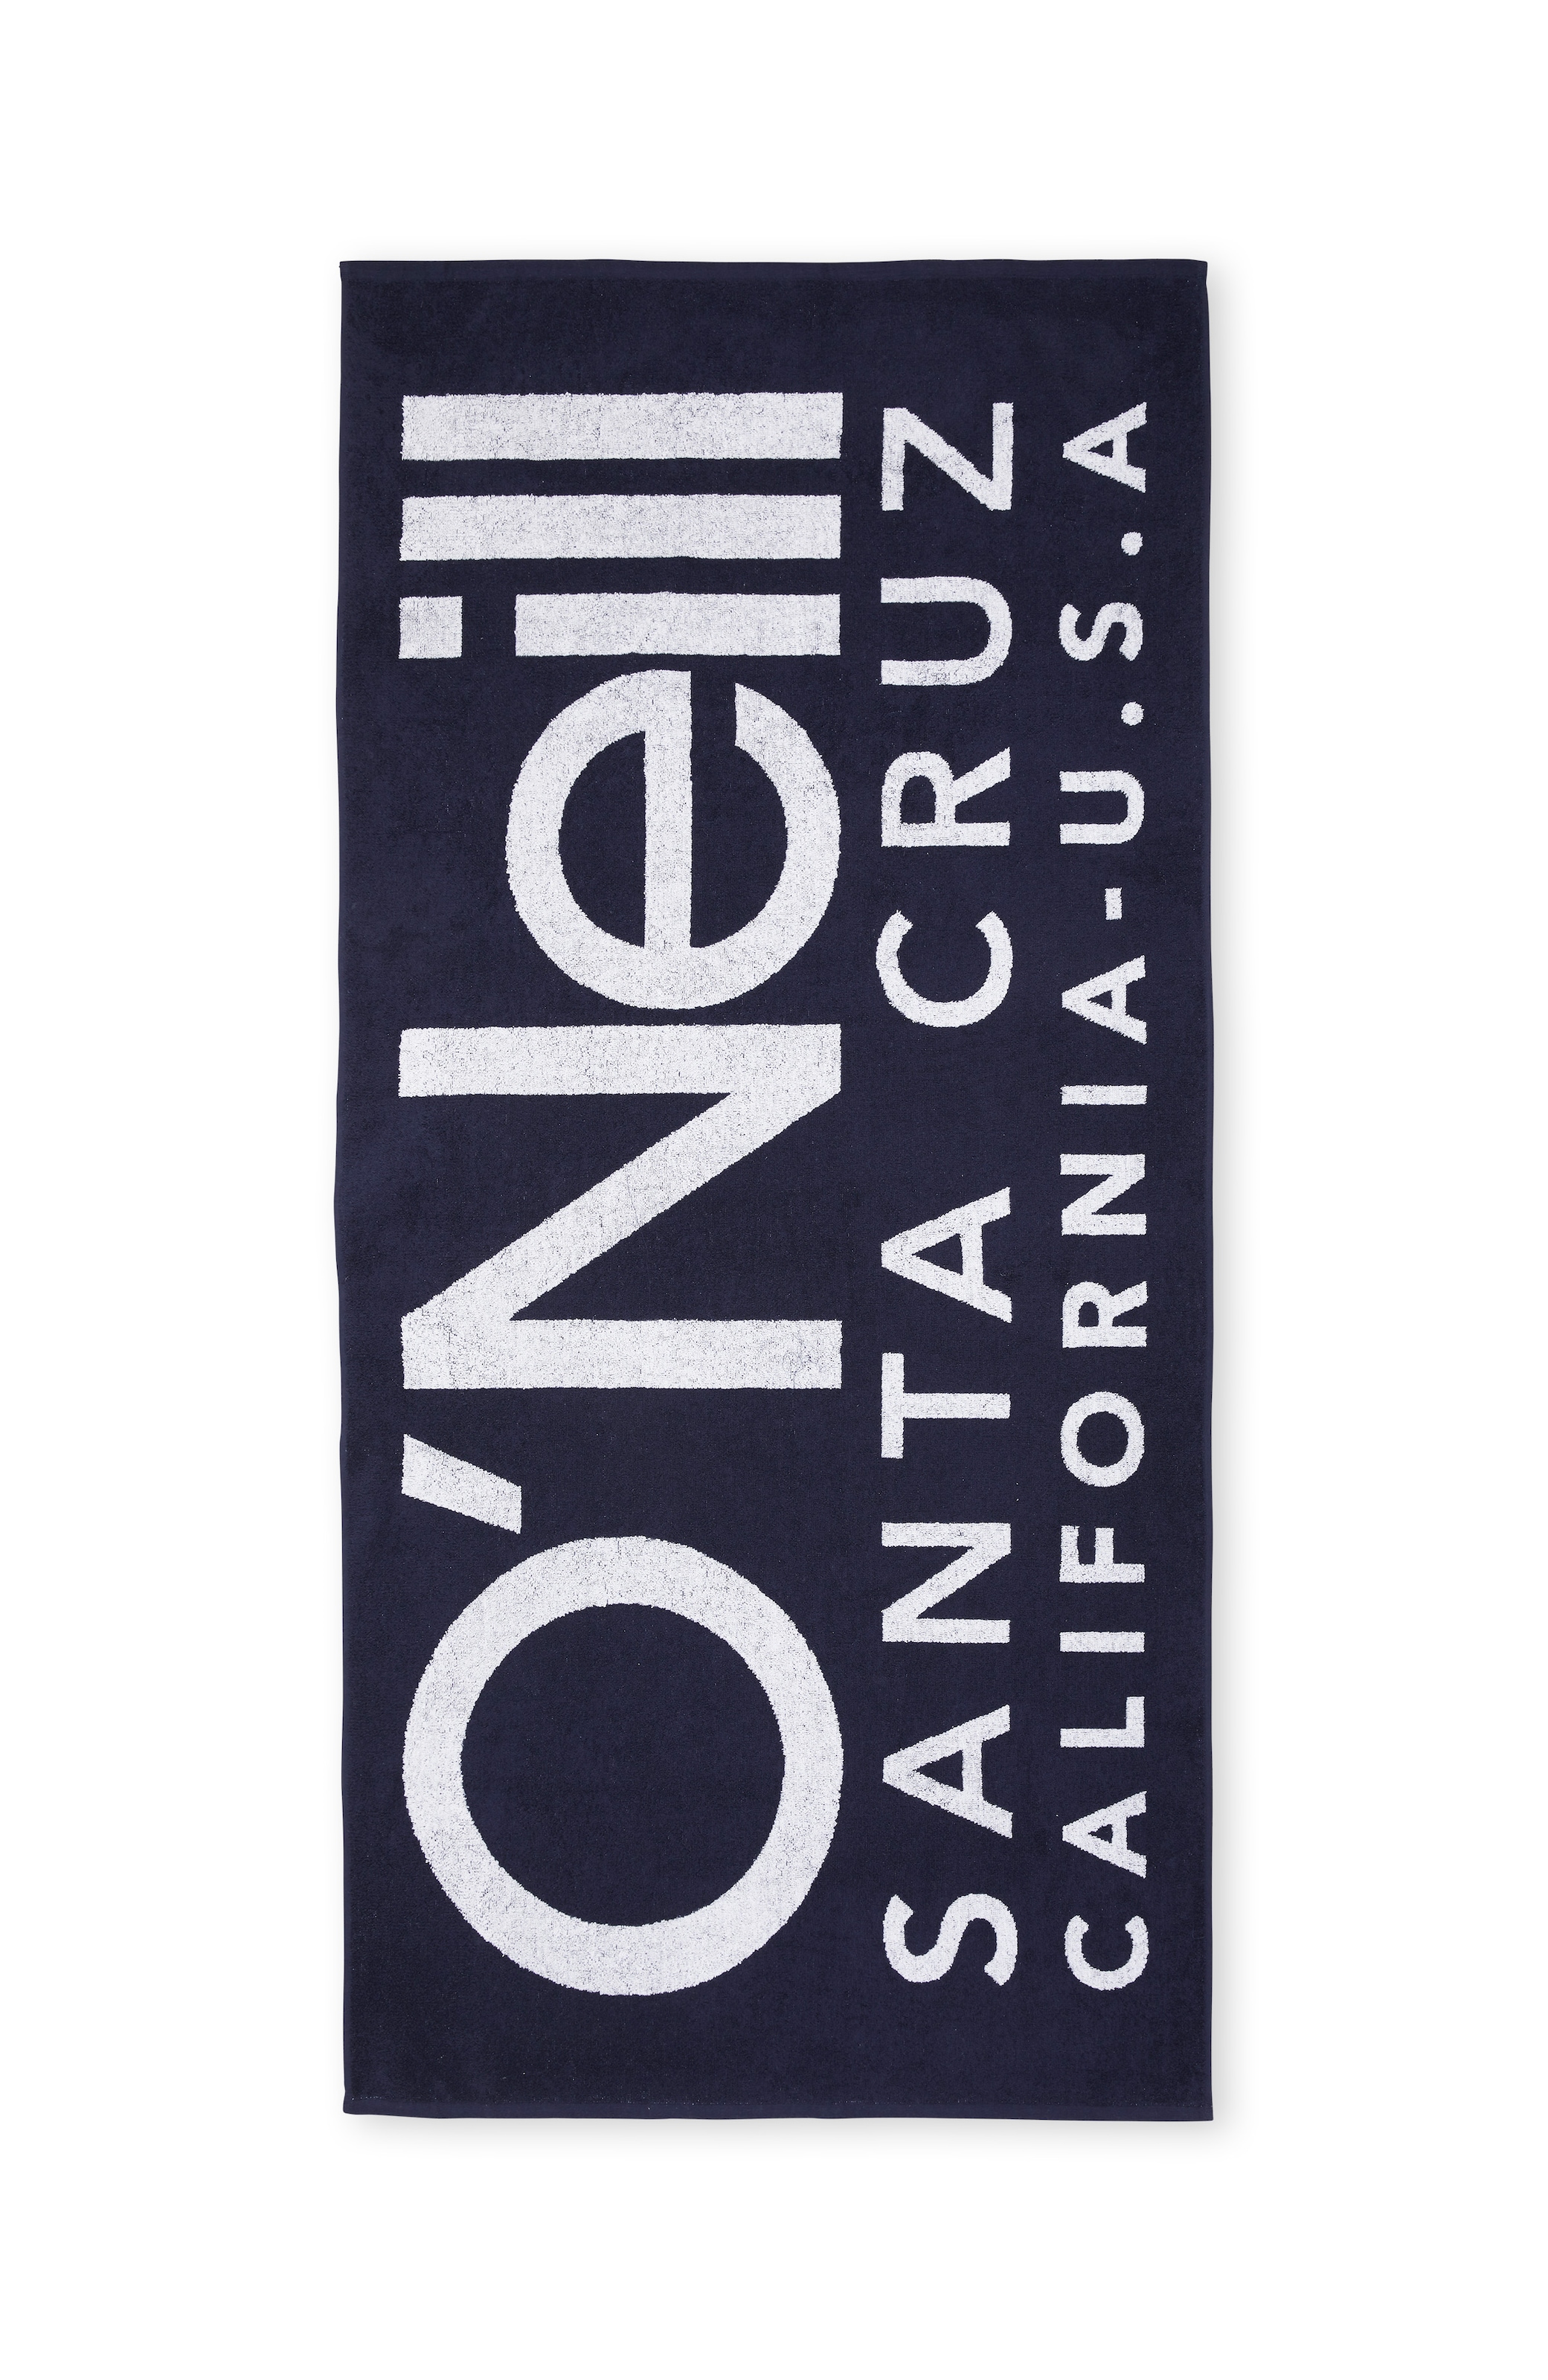 O'Neill Handtuch »SEAWATER TOWEL«, (1 St.)